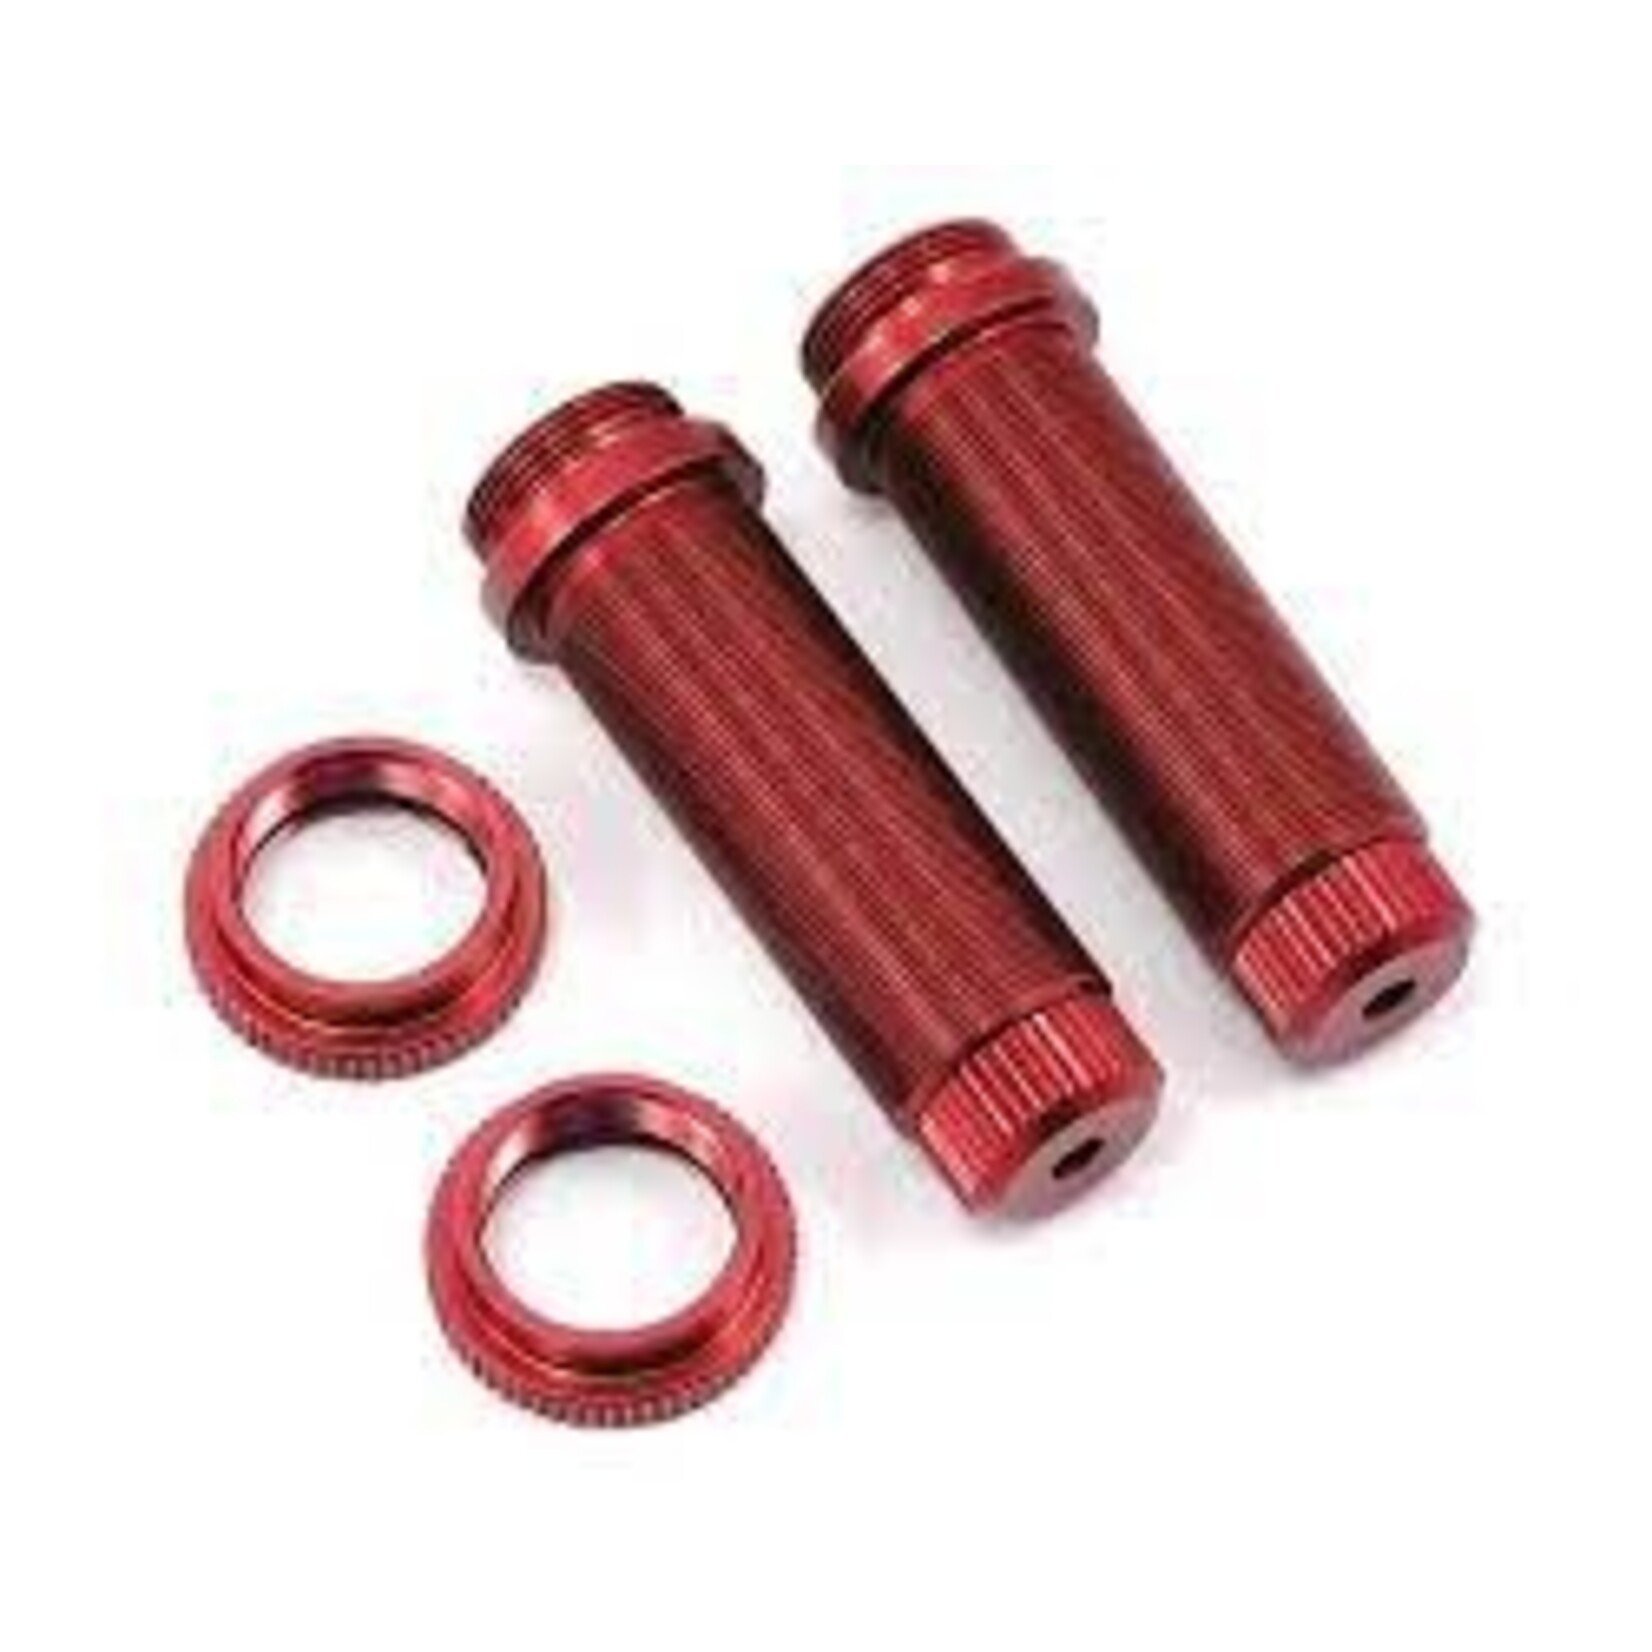 ST Racing Concepts threaded shock bodies-rear-red